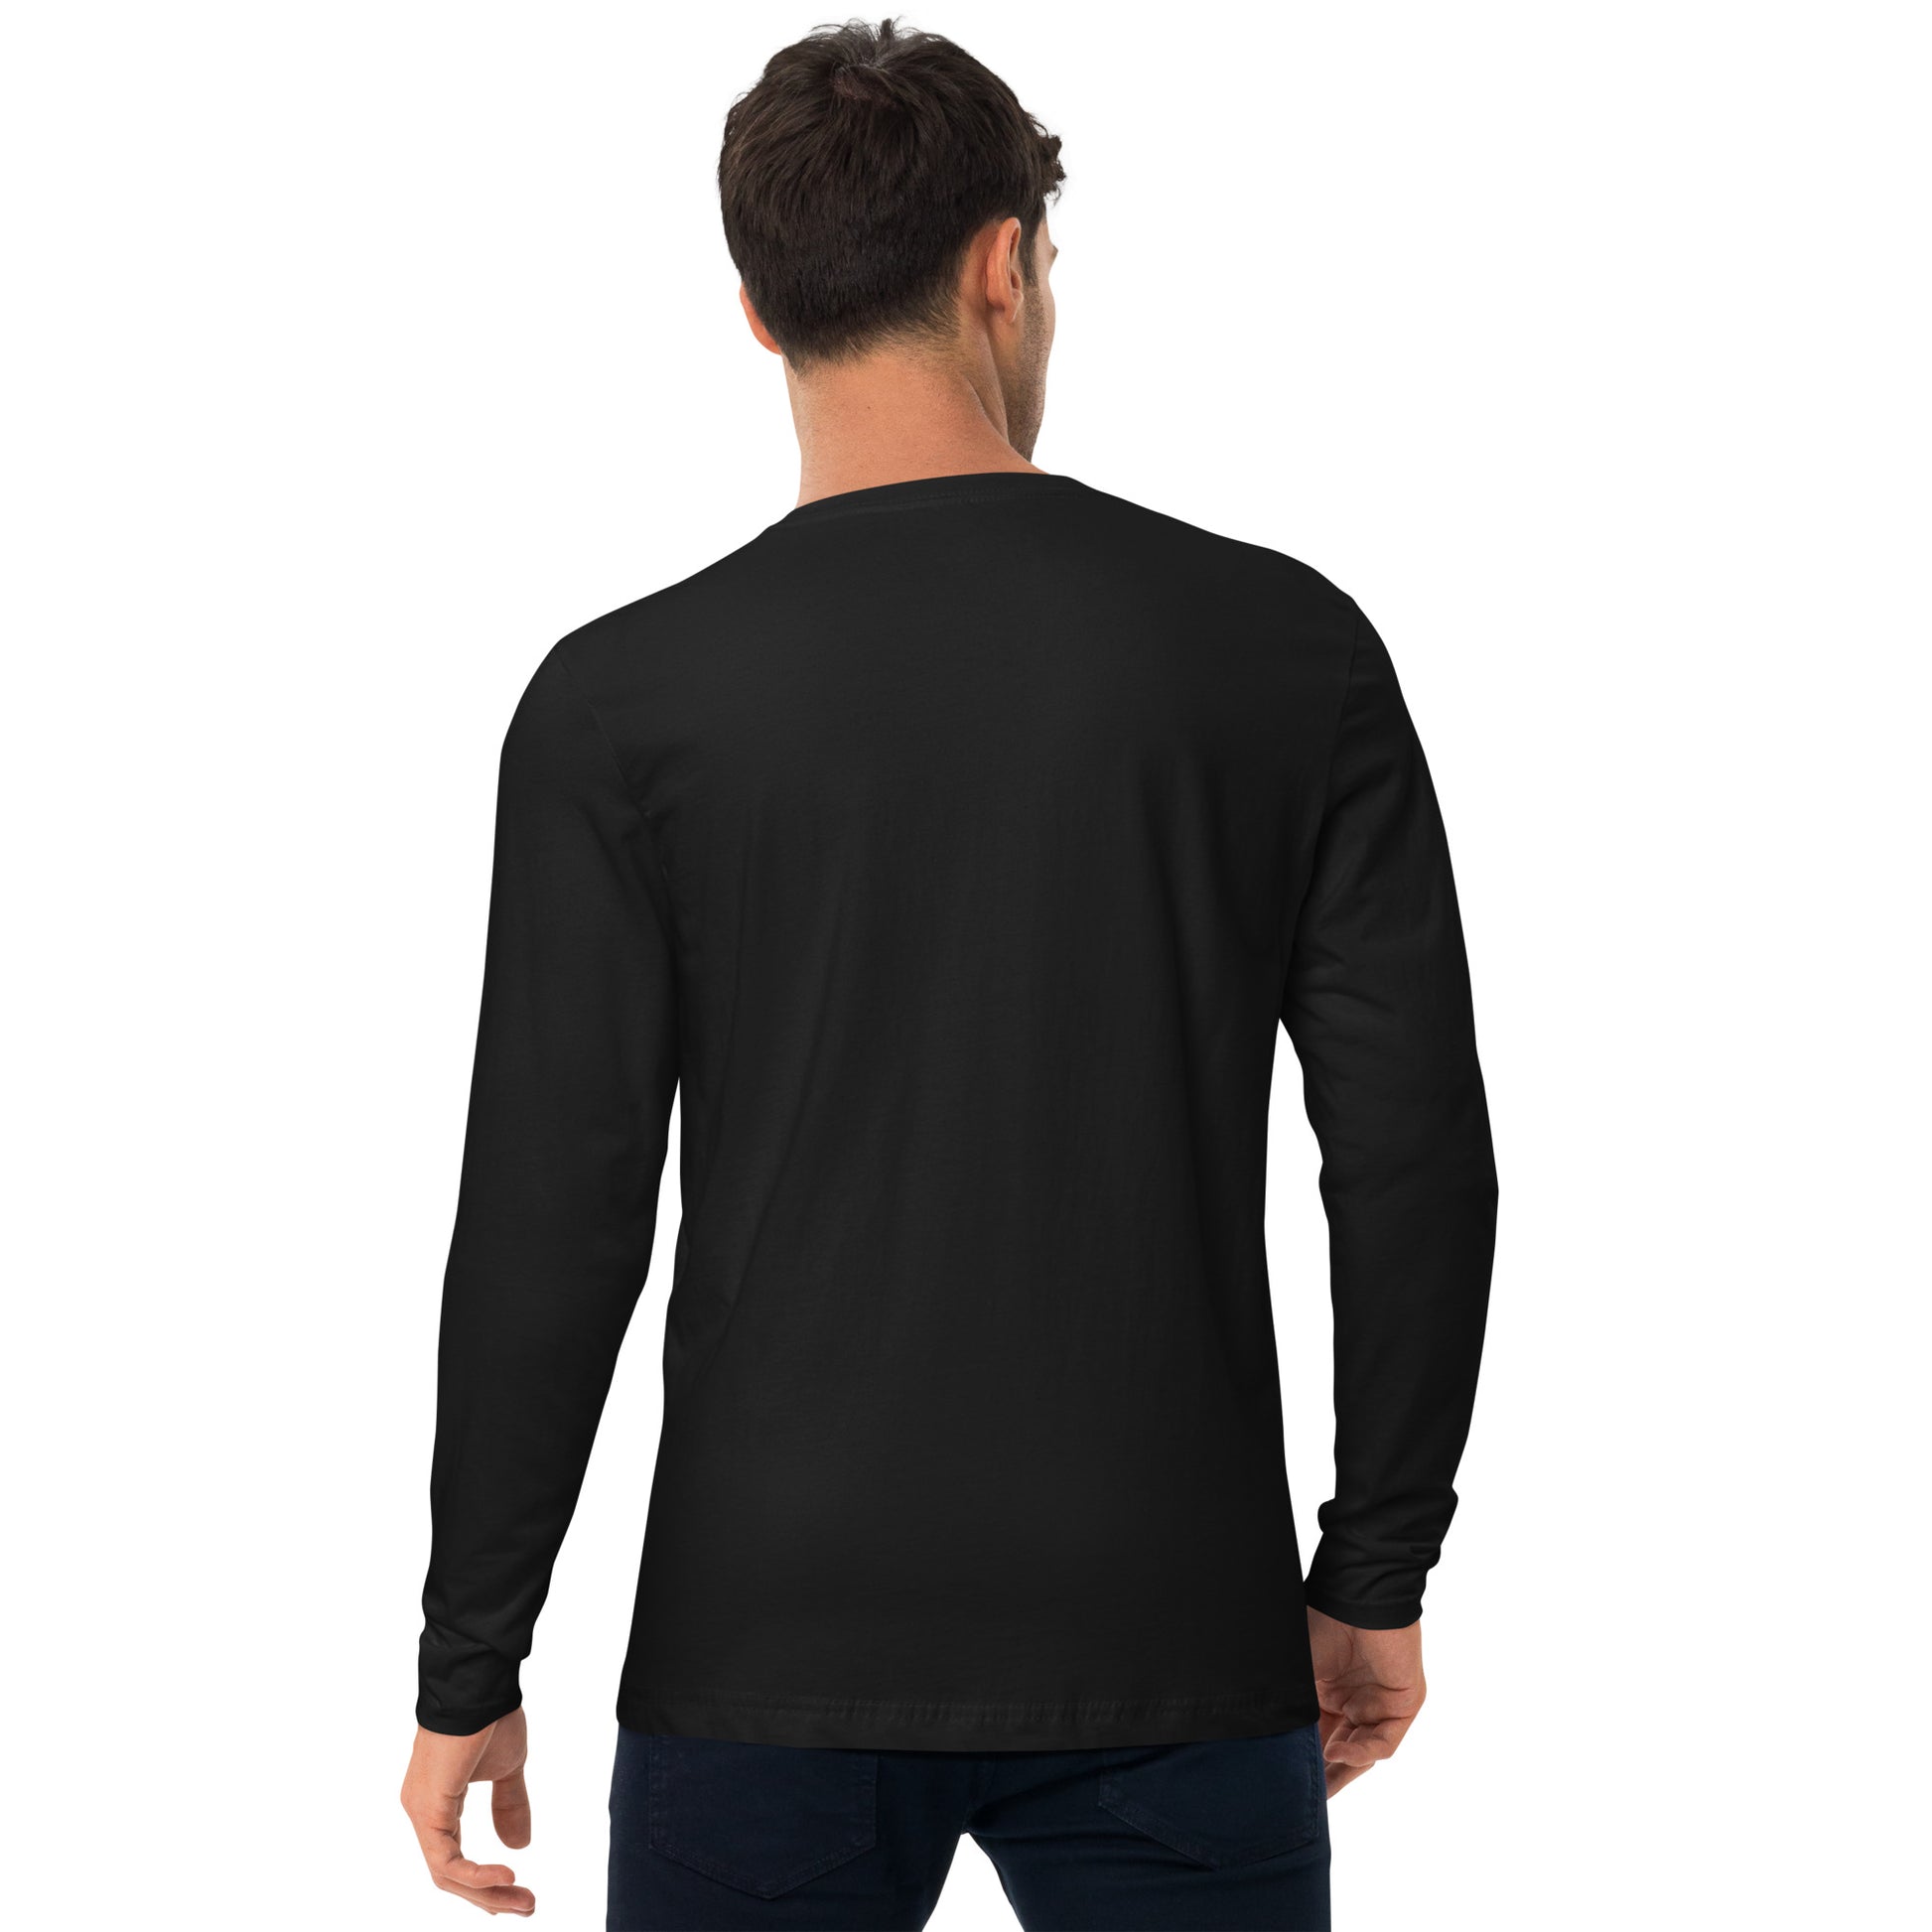 Men's Long Sleeve Crew Shirt - 5 Things About My Wife - FAFO Sportswear